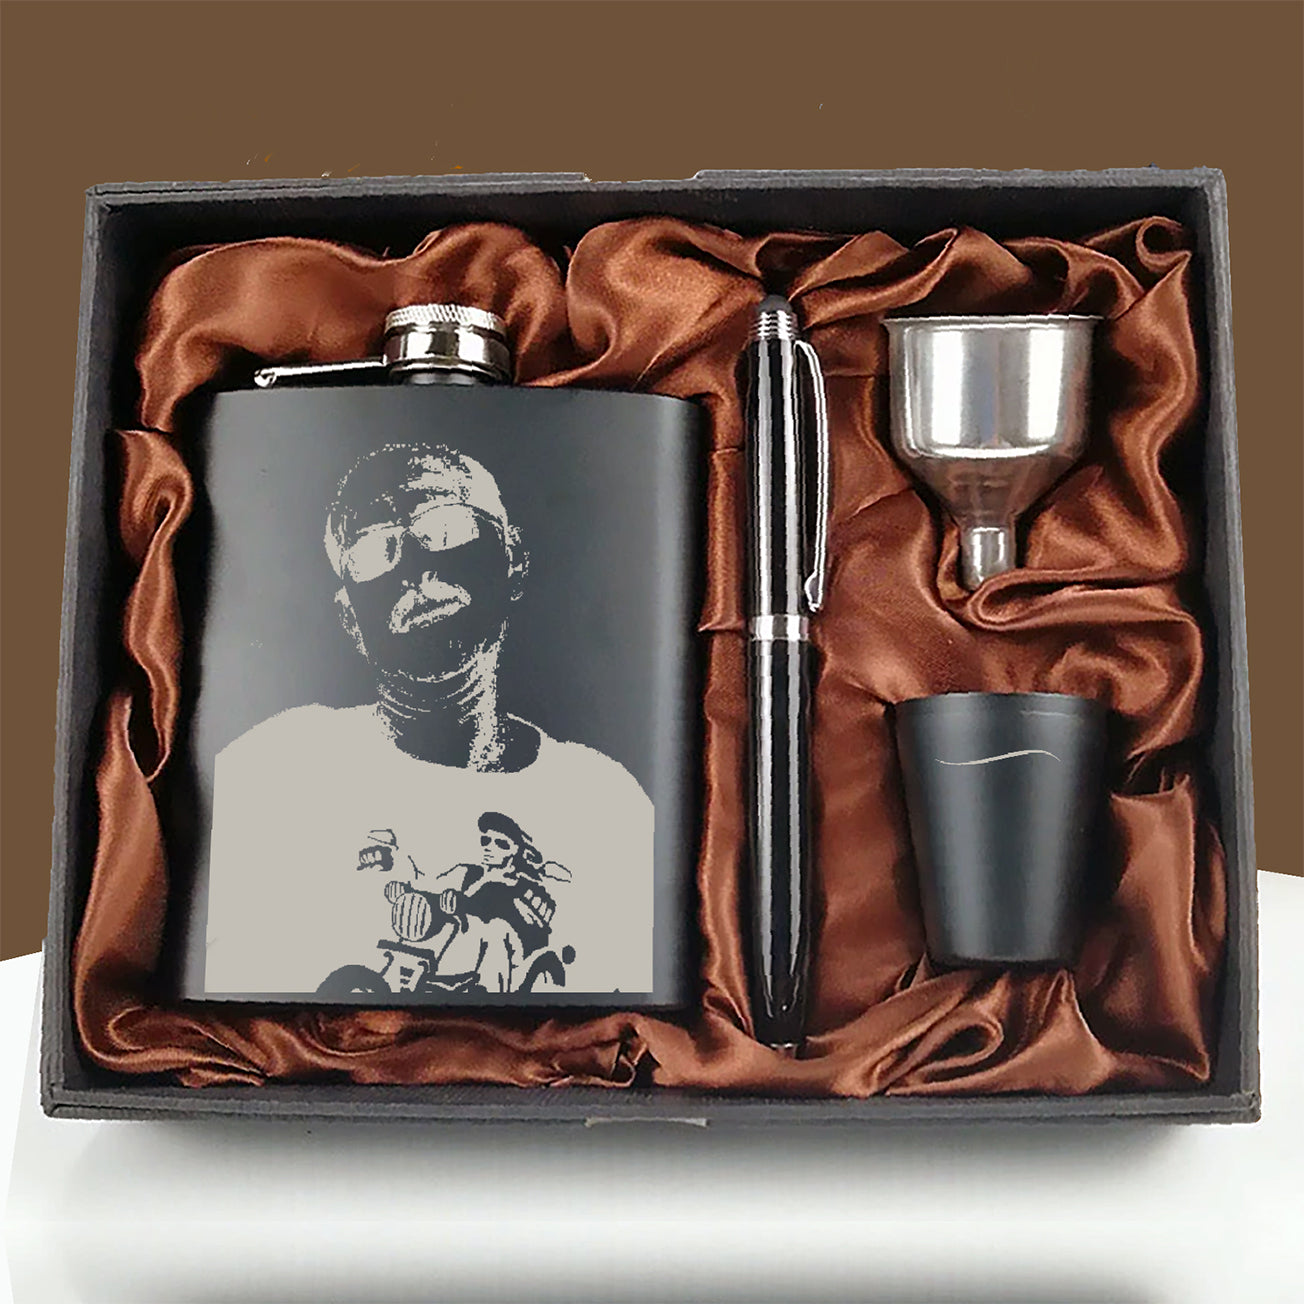 Personalized Hip Flask with a engraved photo. – aartsengravery